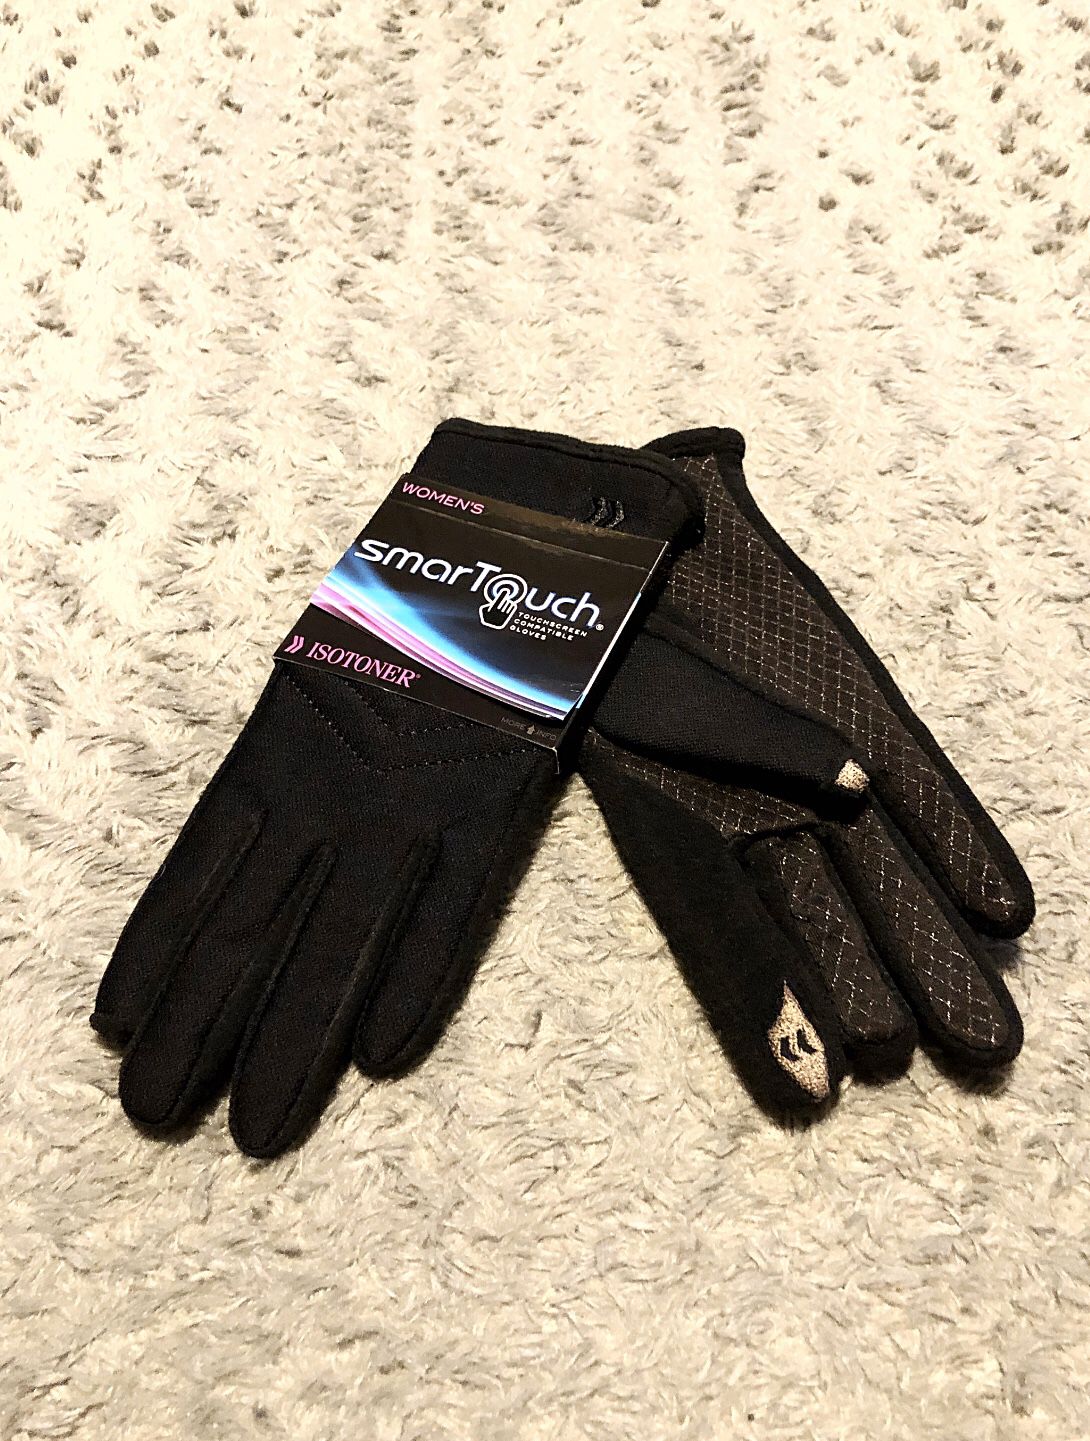 New! Women's Isotoner Smartouch gloves paid $45 size M/L Brand new never worn! Black Smartouch gloves